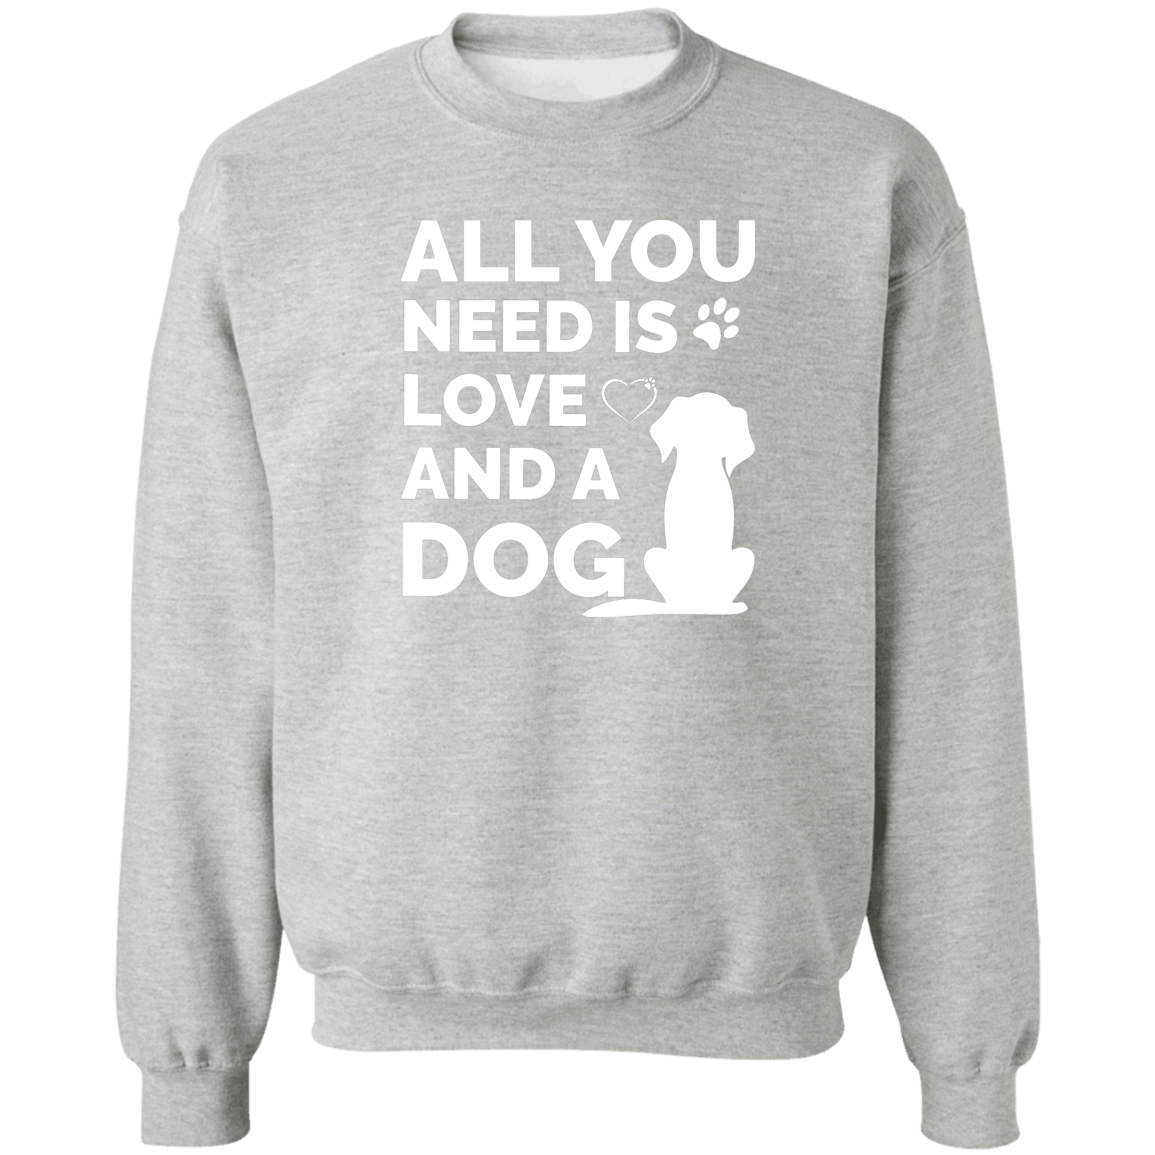 All You Need Is Love And A Dog - Sweatshirt.